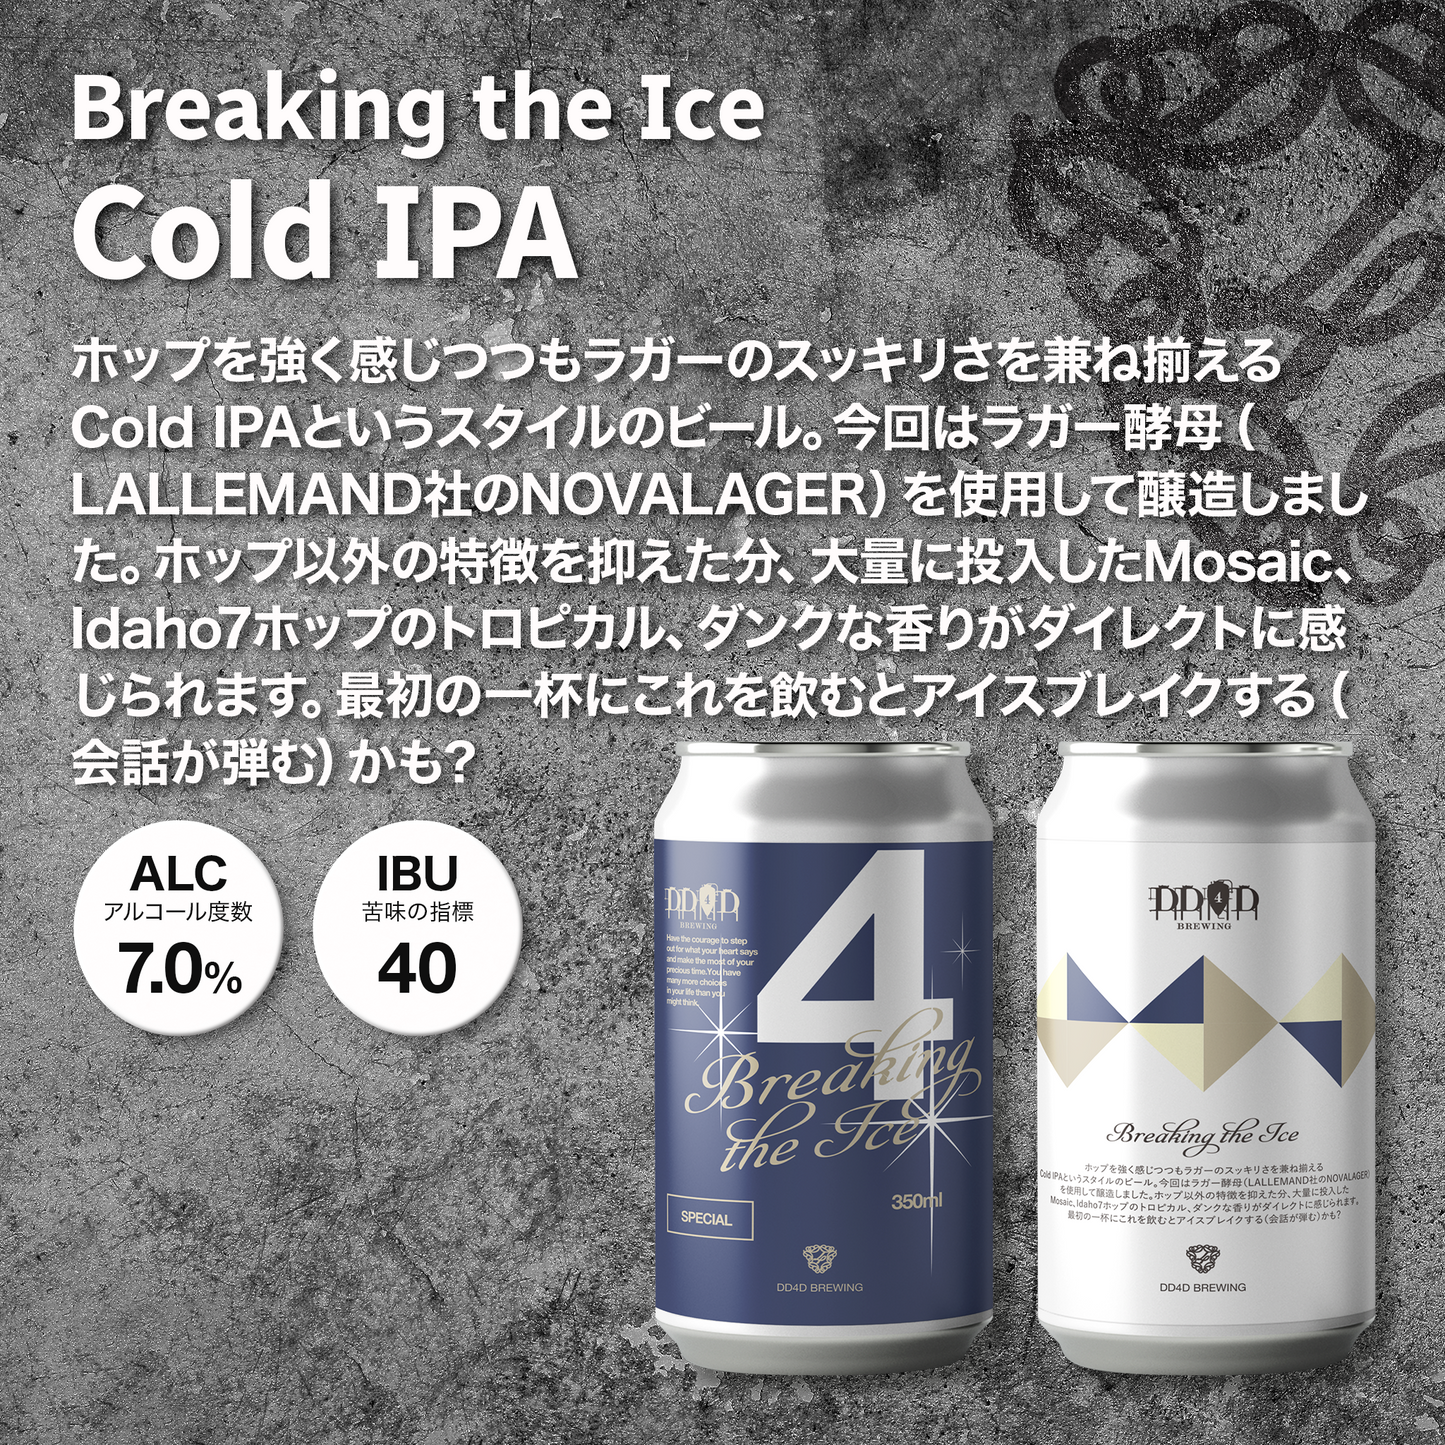 Breaking the Ice（Cold IPA）